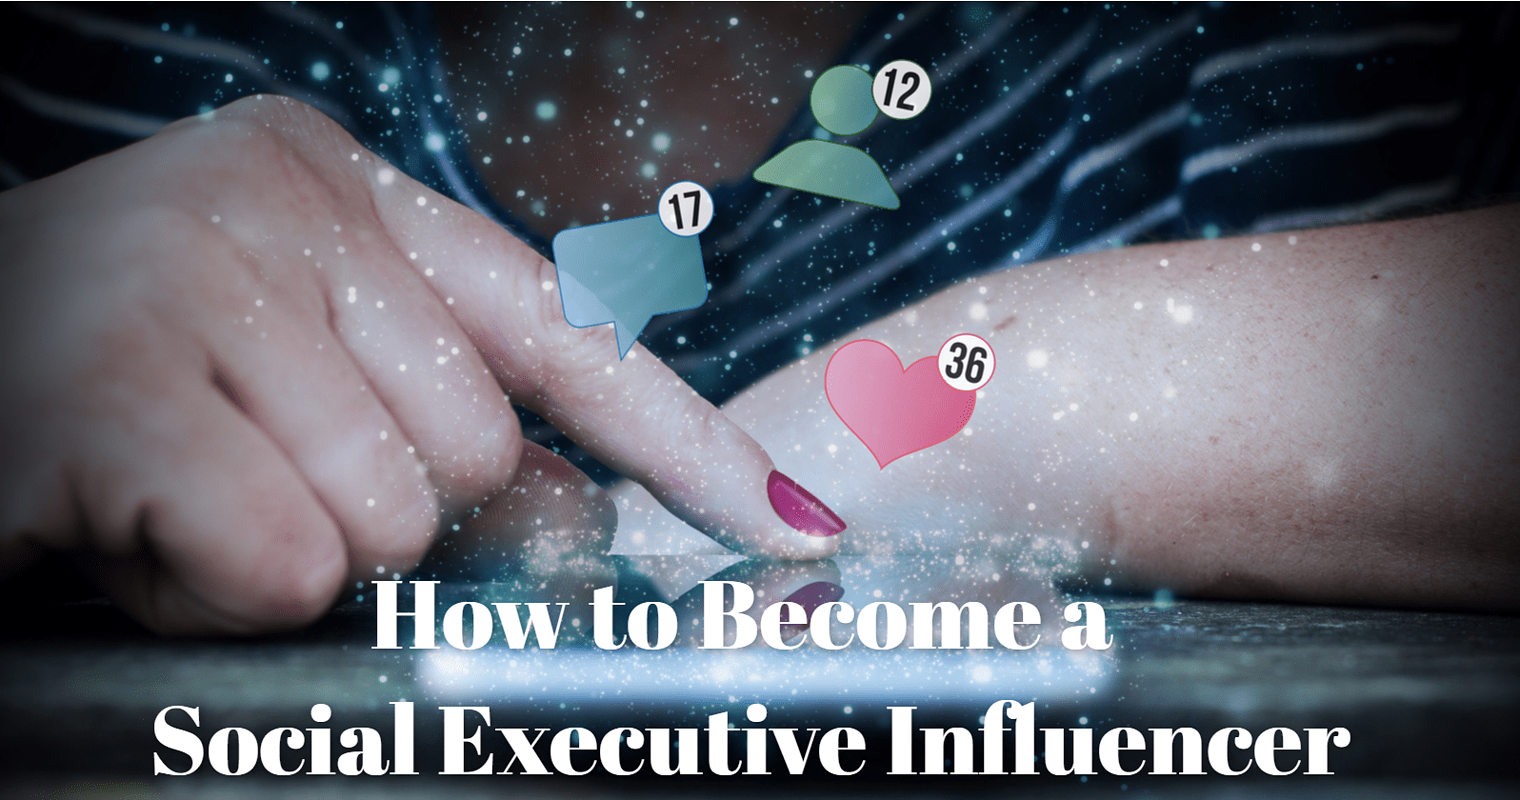 The 5 Steps to Becoming a Social Executive Influencer